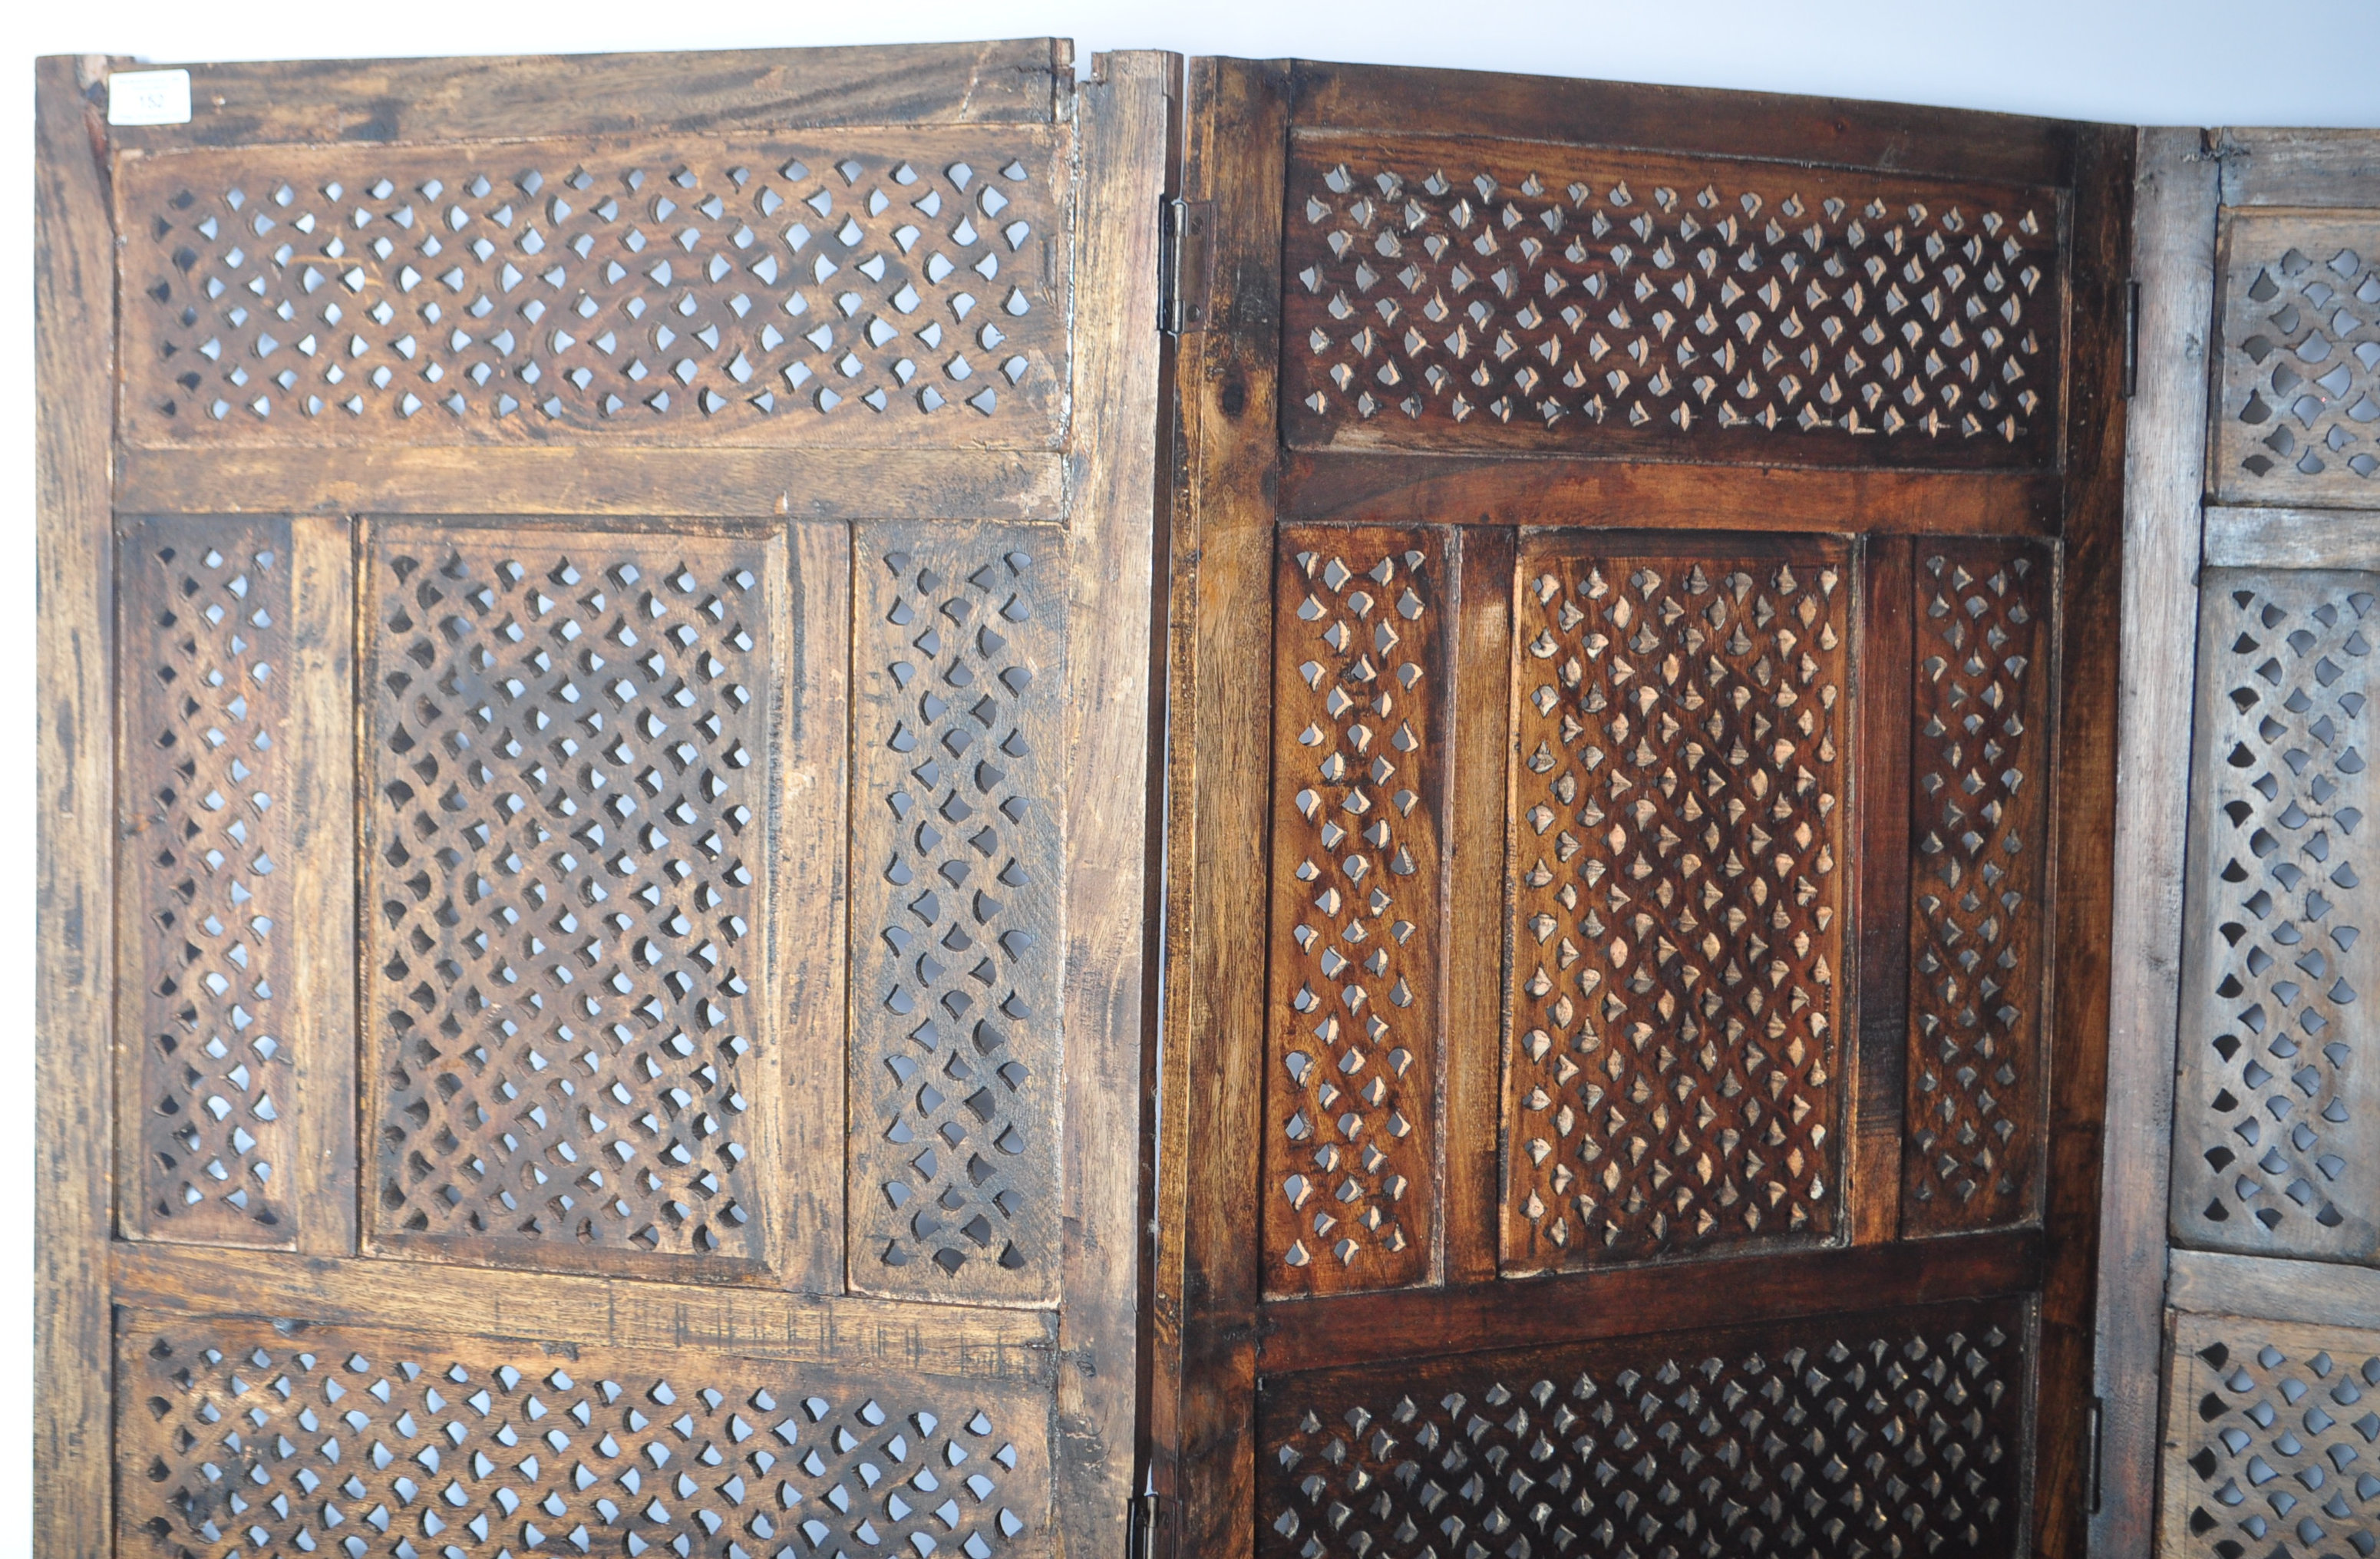 EARLY 20TH CENTURY INDIAN HARDWOOD THREE SECTION FOLDING SCREEN - Image 2 of 4